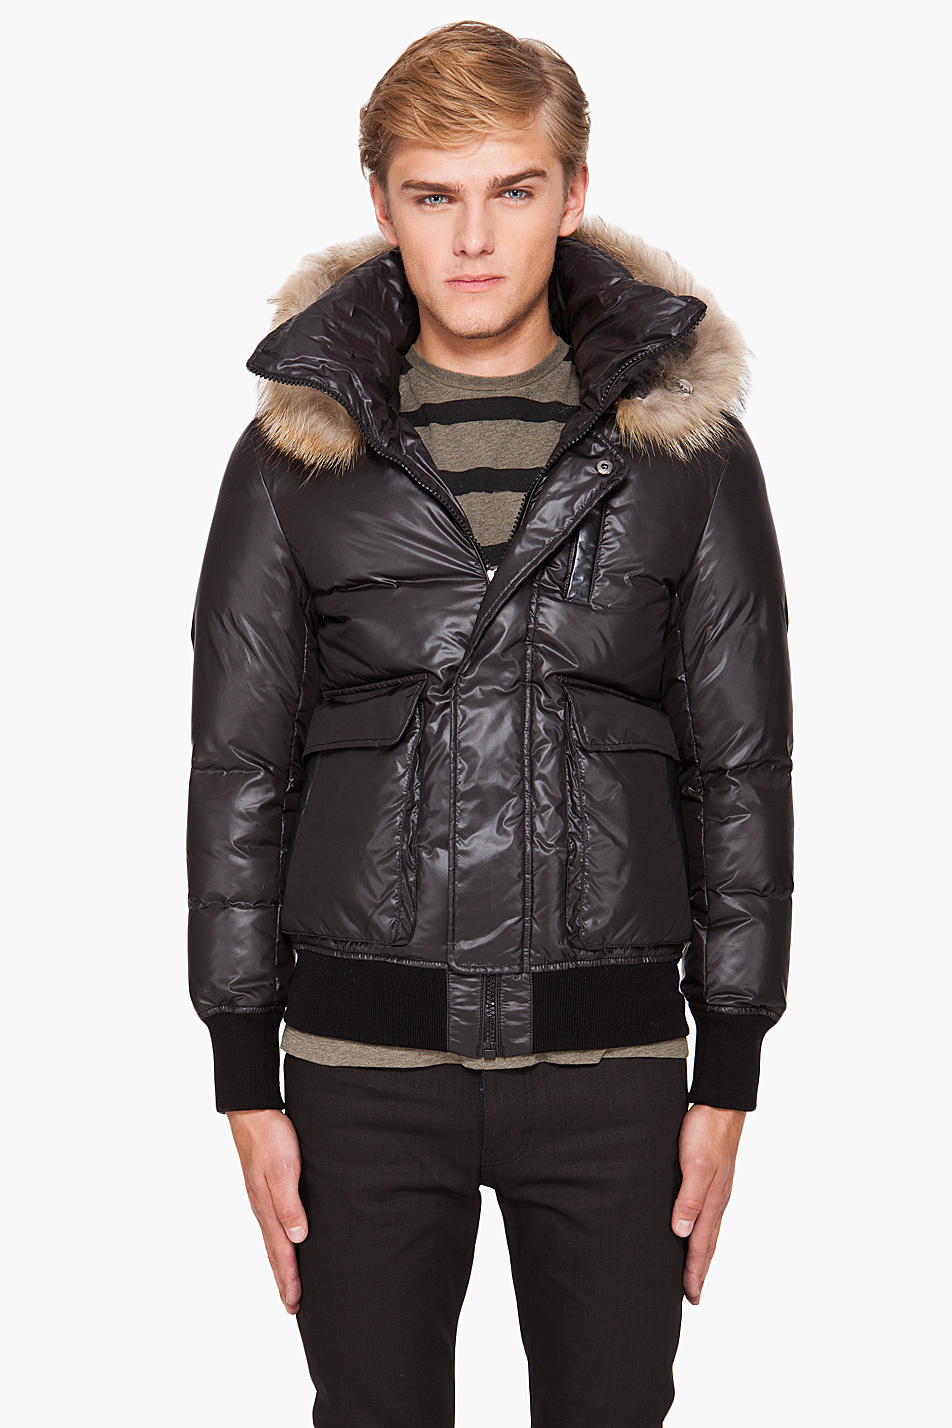 Lyst - Mackage Florian Winter Down Bomber Jacket With Fur In Black in ...